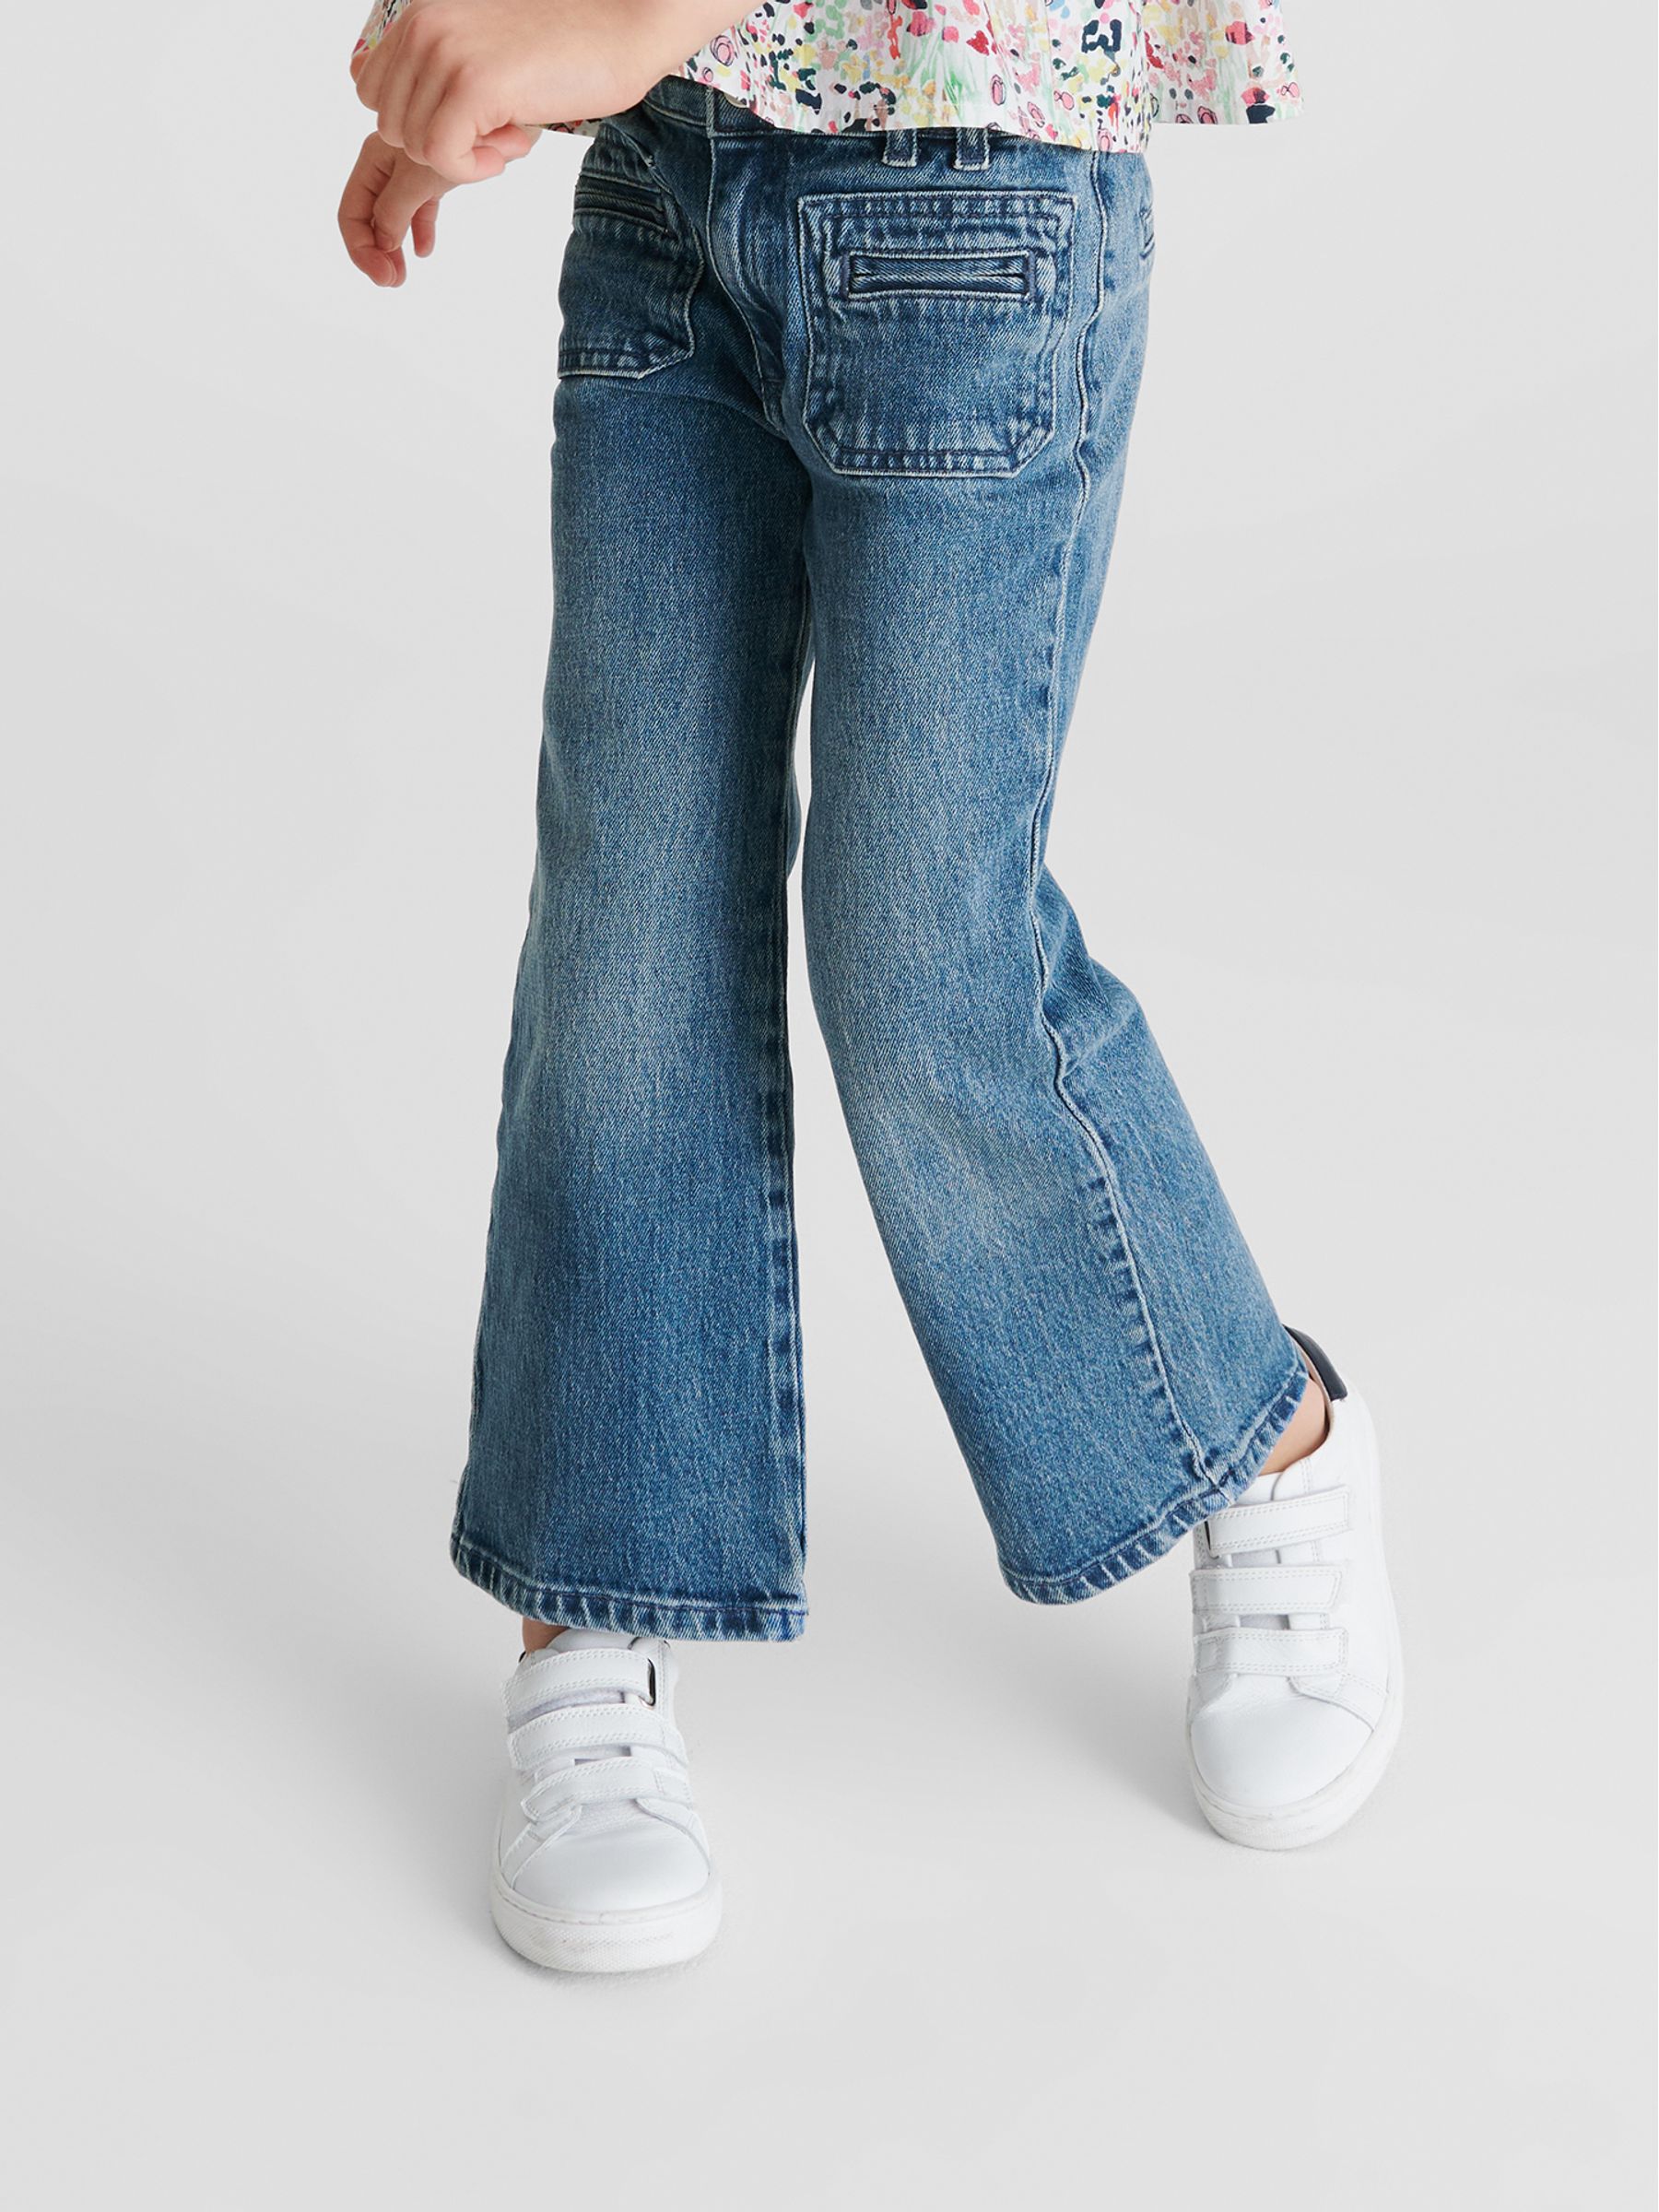 SC605 Ex Chainstore Junior 90s Inspired Flared Jeans x14